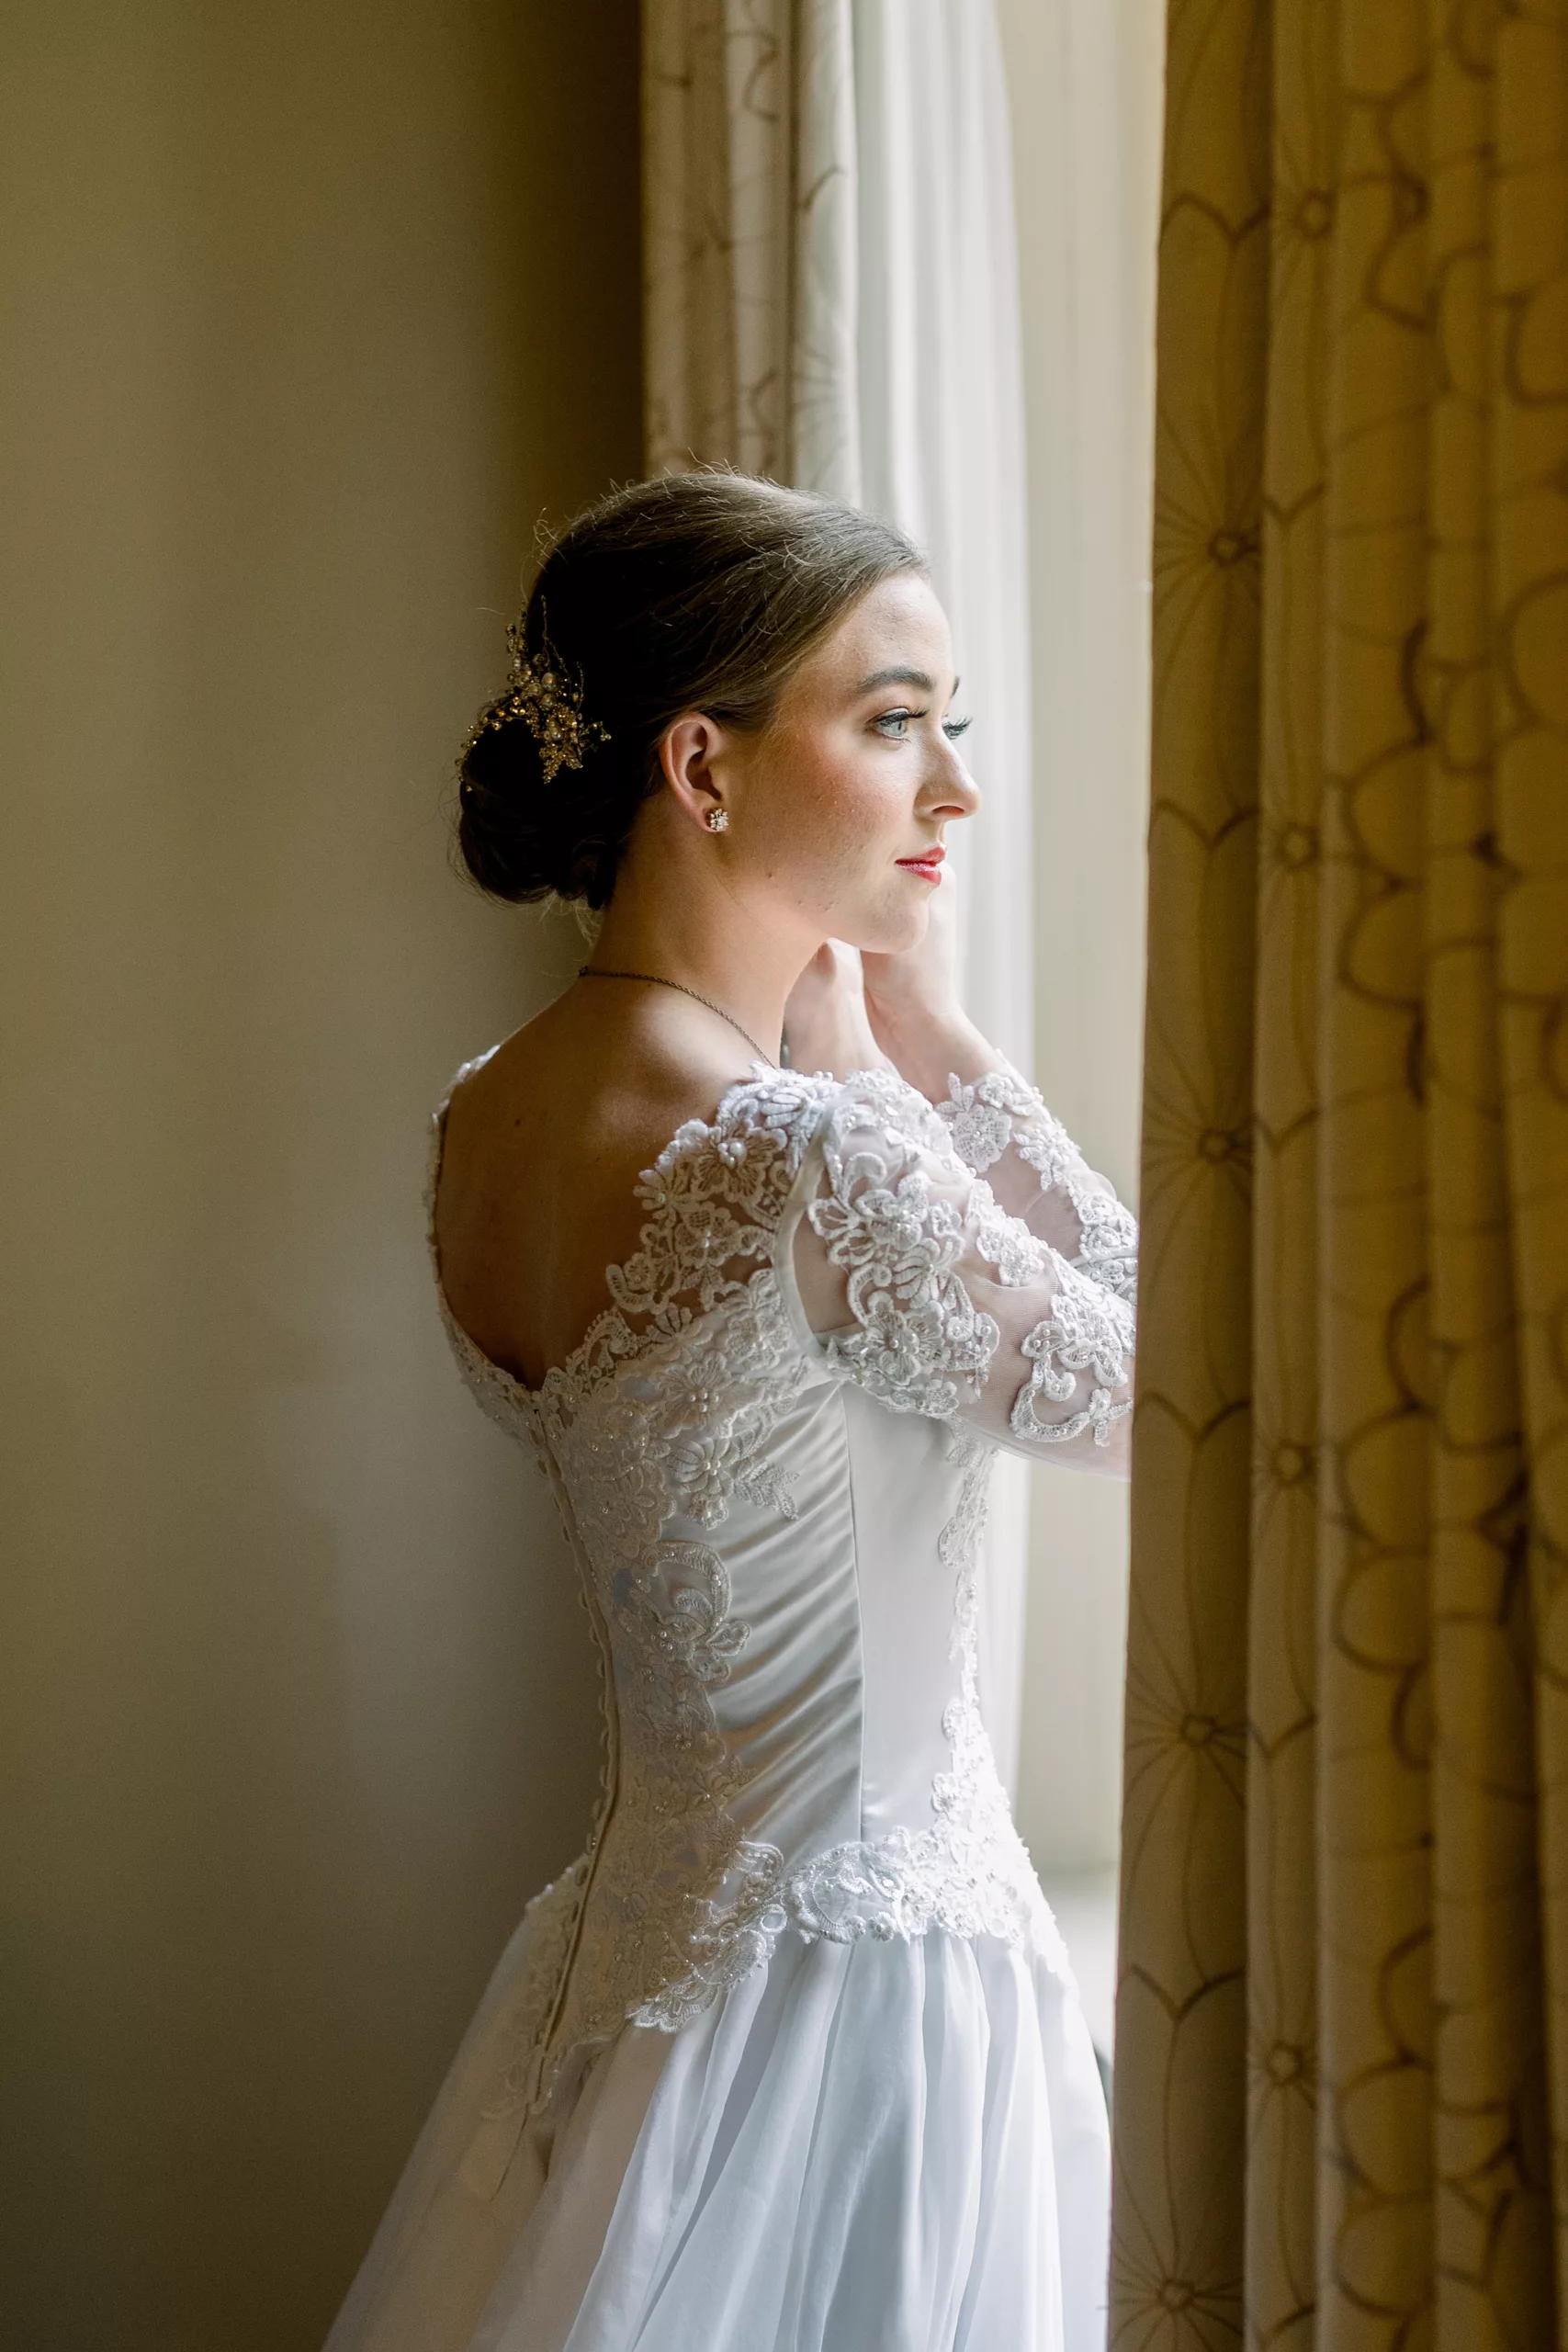 A bride in a white lace dress stands in a window putting on her earrings 